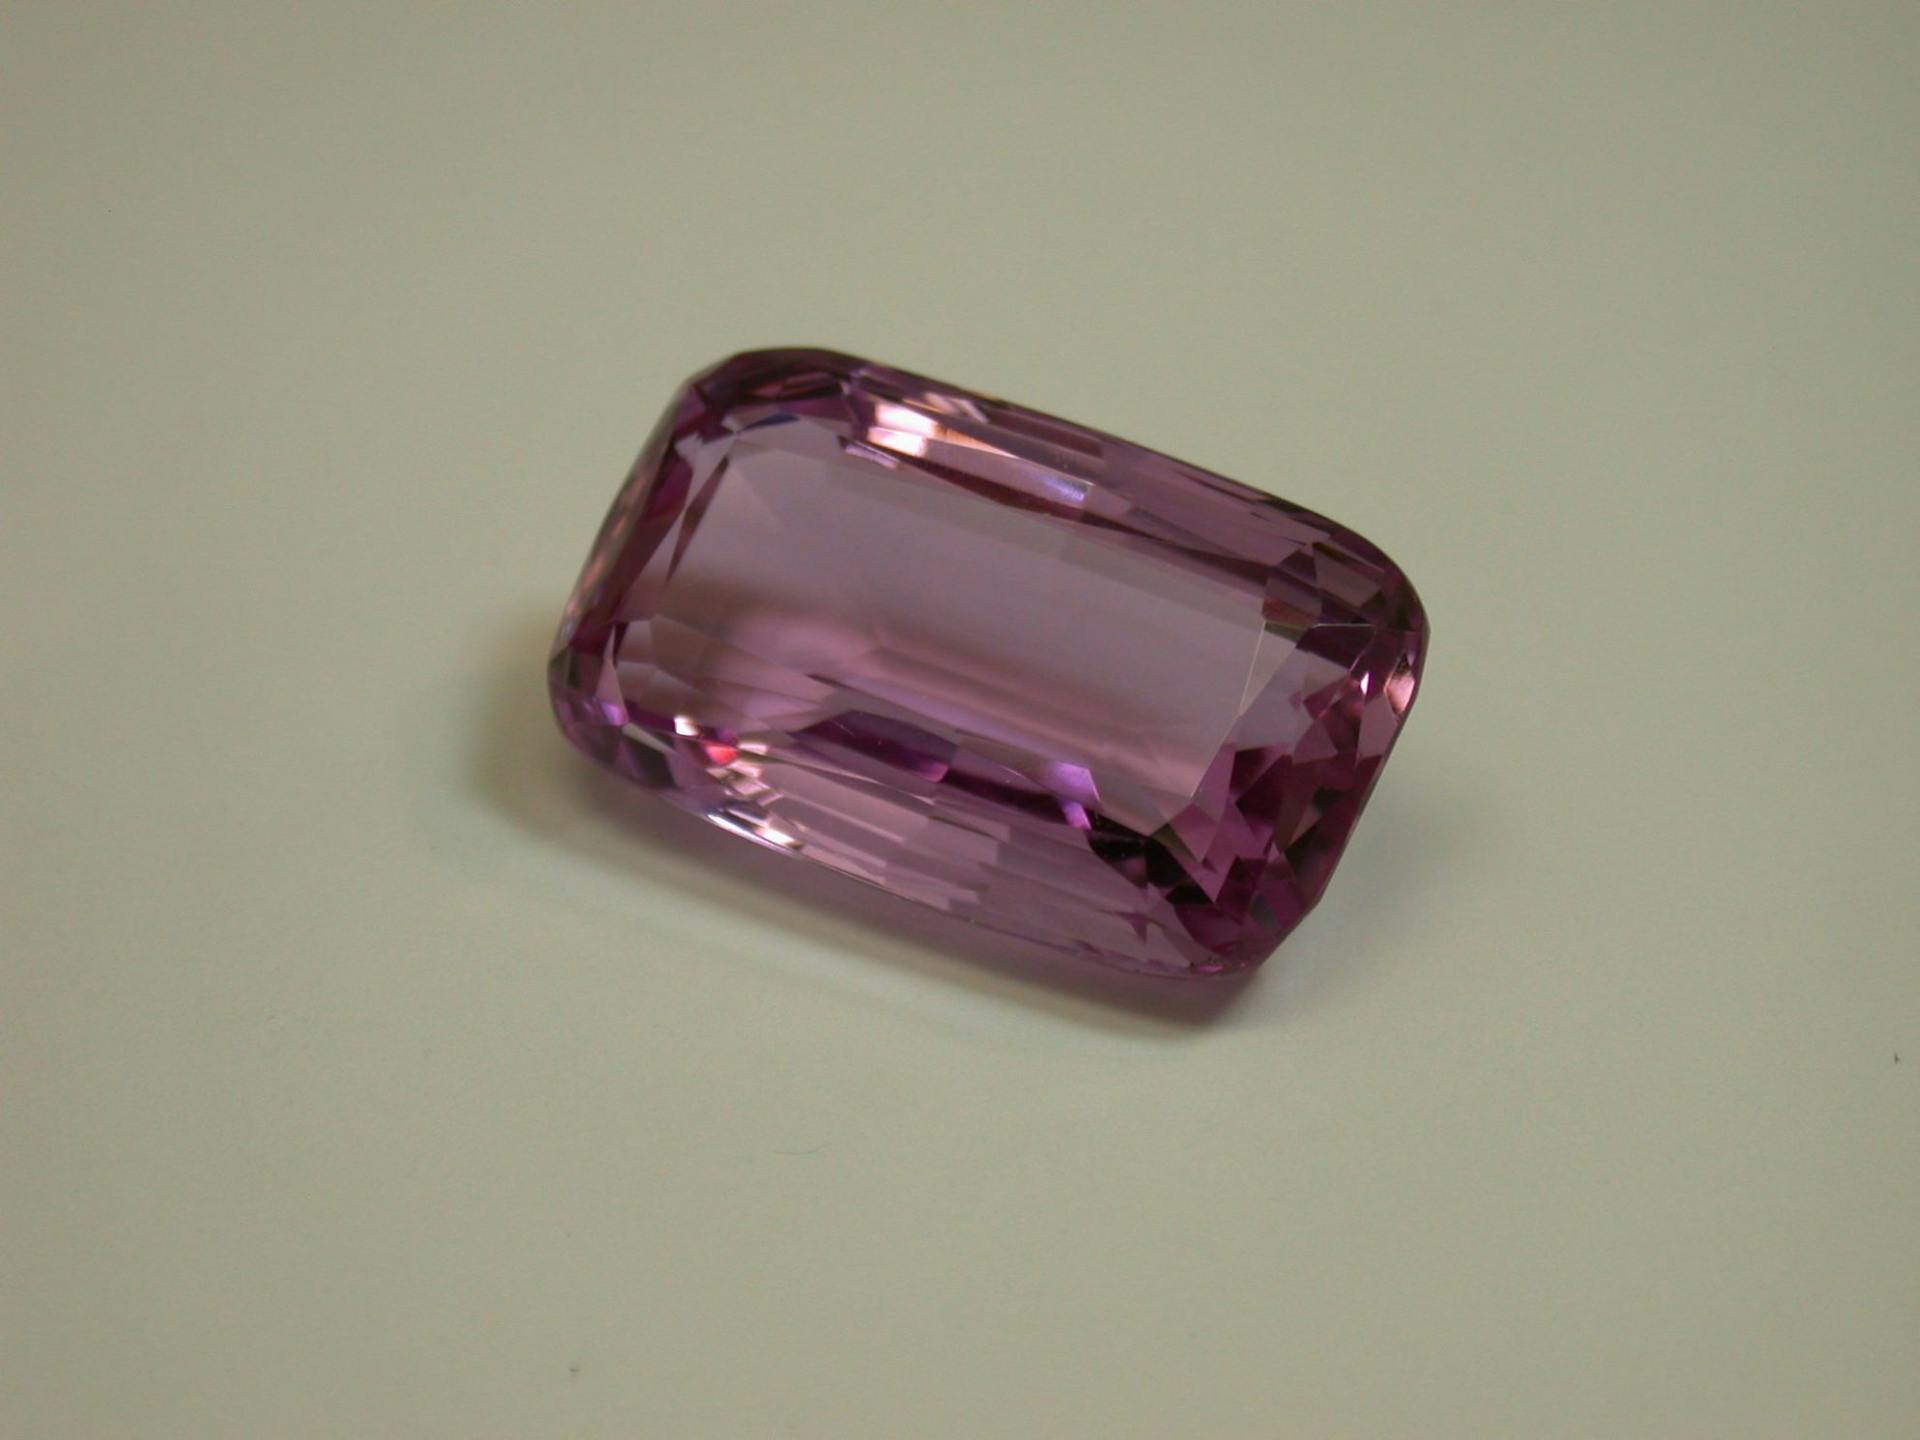 topaz buying guide - unusually large pink topaz